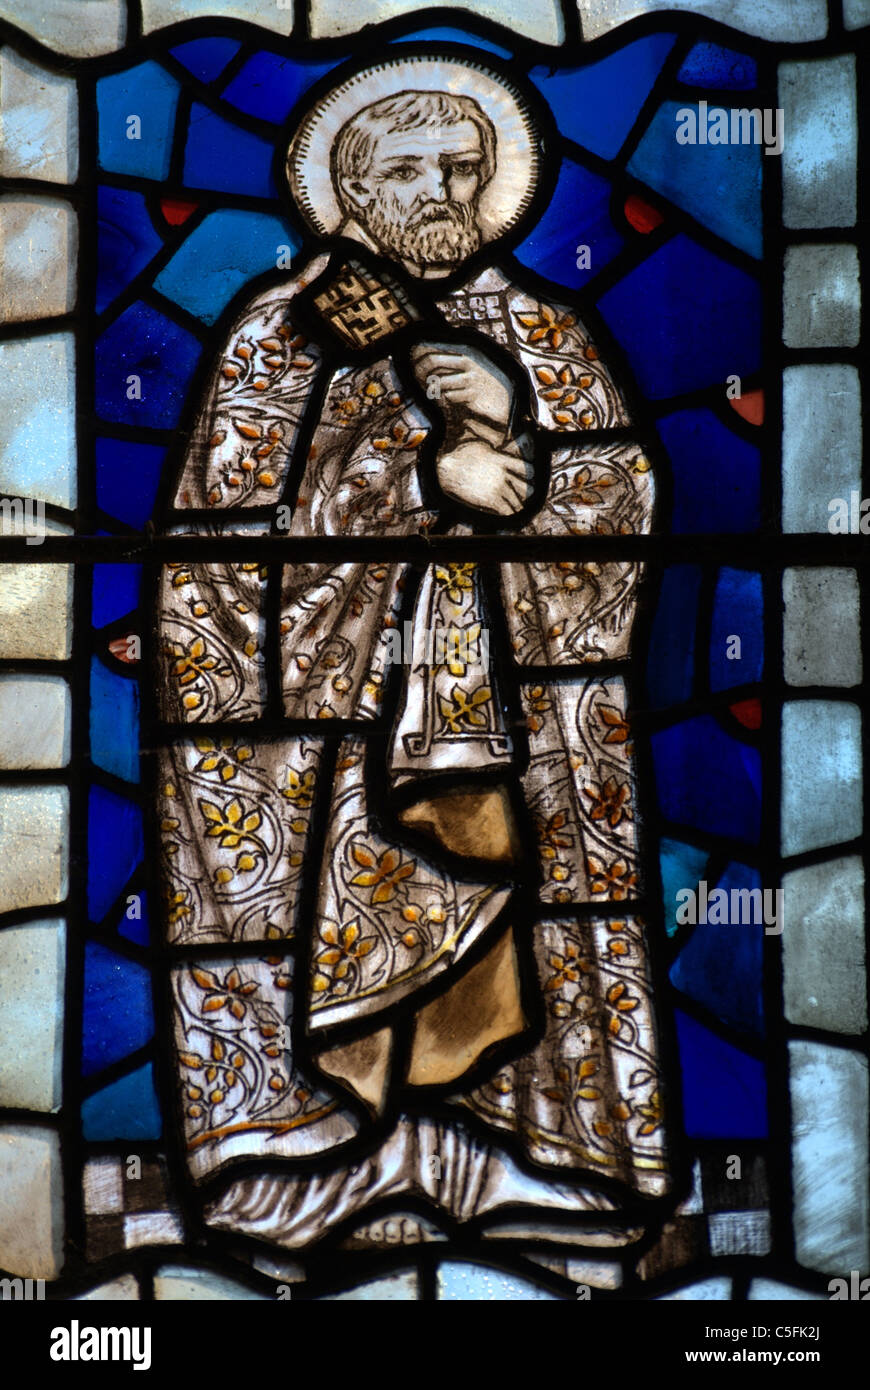 Section of stained glass depicting St.Peter, brother of Andrew both fishermen making a living from the sea of Gahilee. Stock Photo